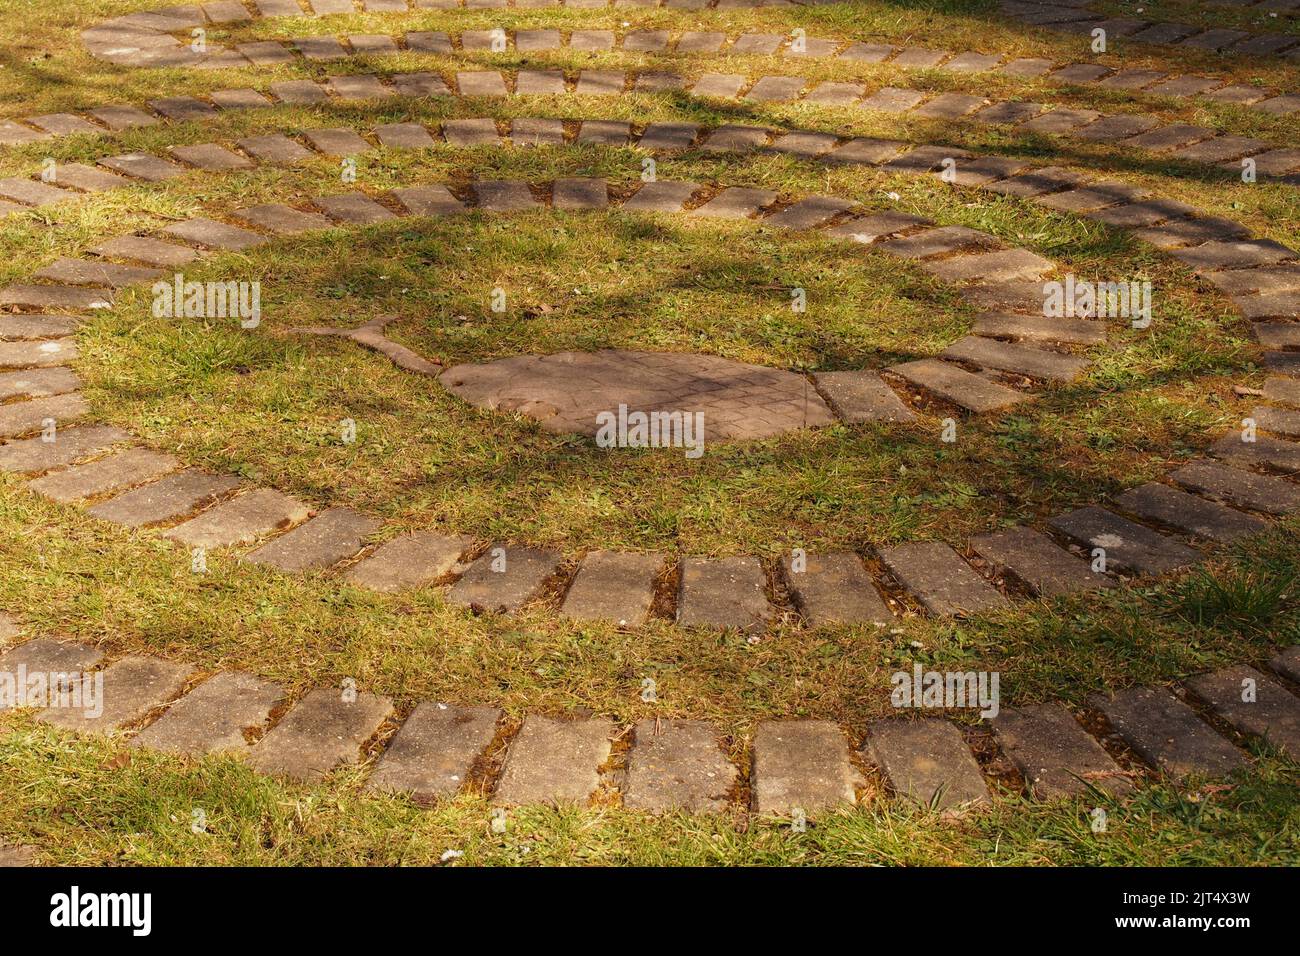 A view of a snake pathway in Brandon Country Park garden, Suffolk, showing the spaced bricks sunk into the lawn, grass. Stock Photo